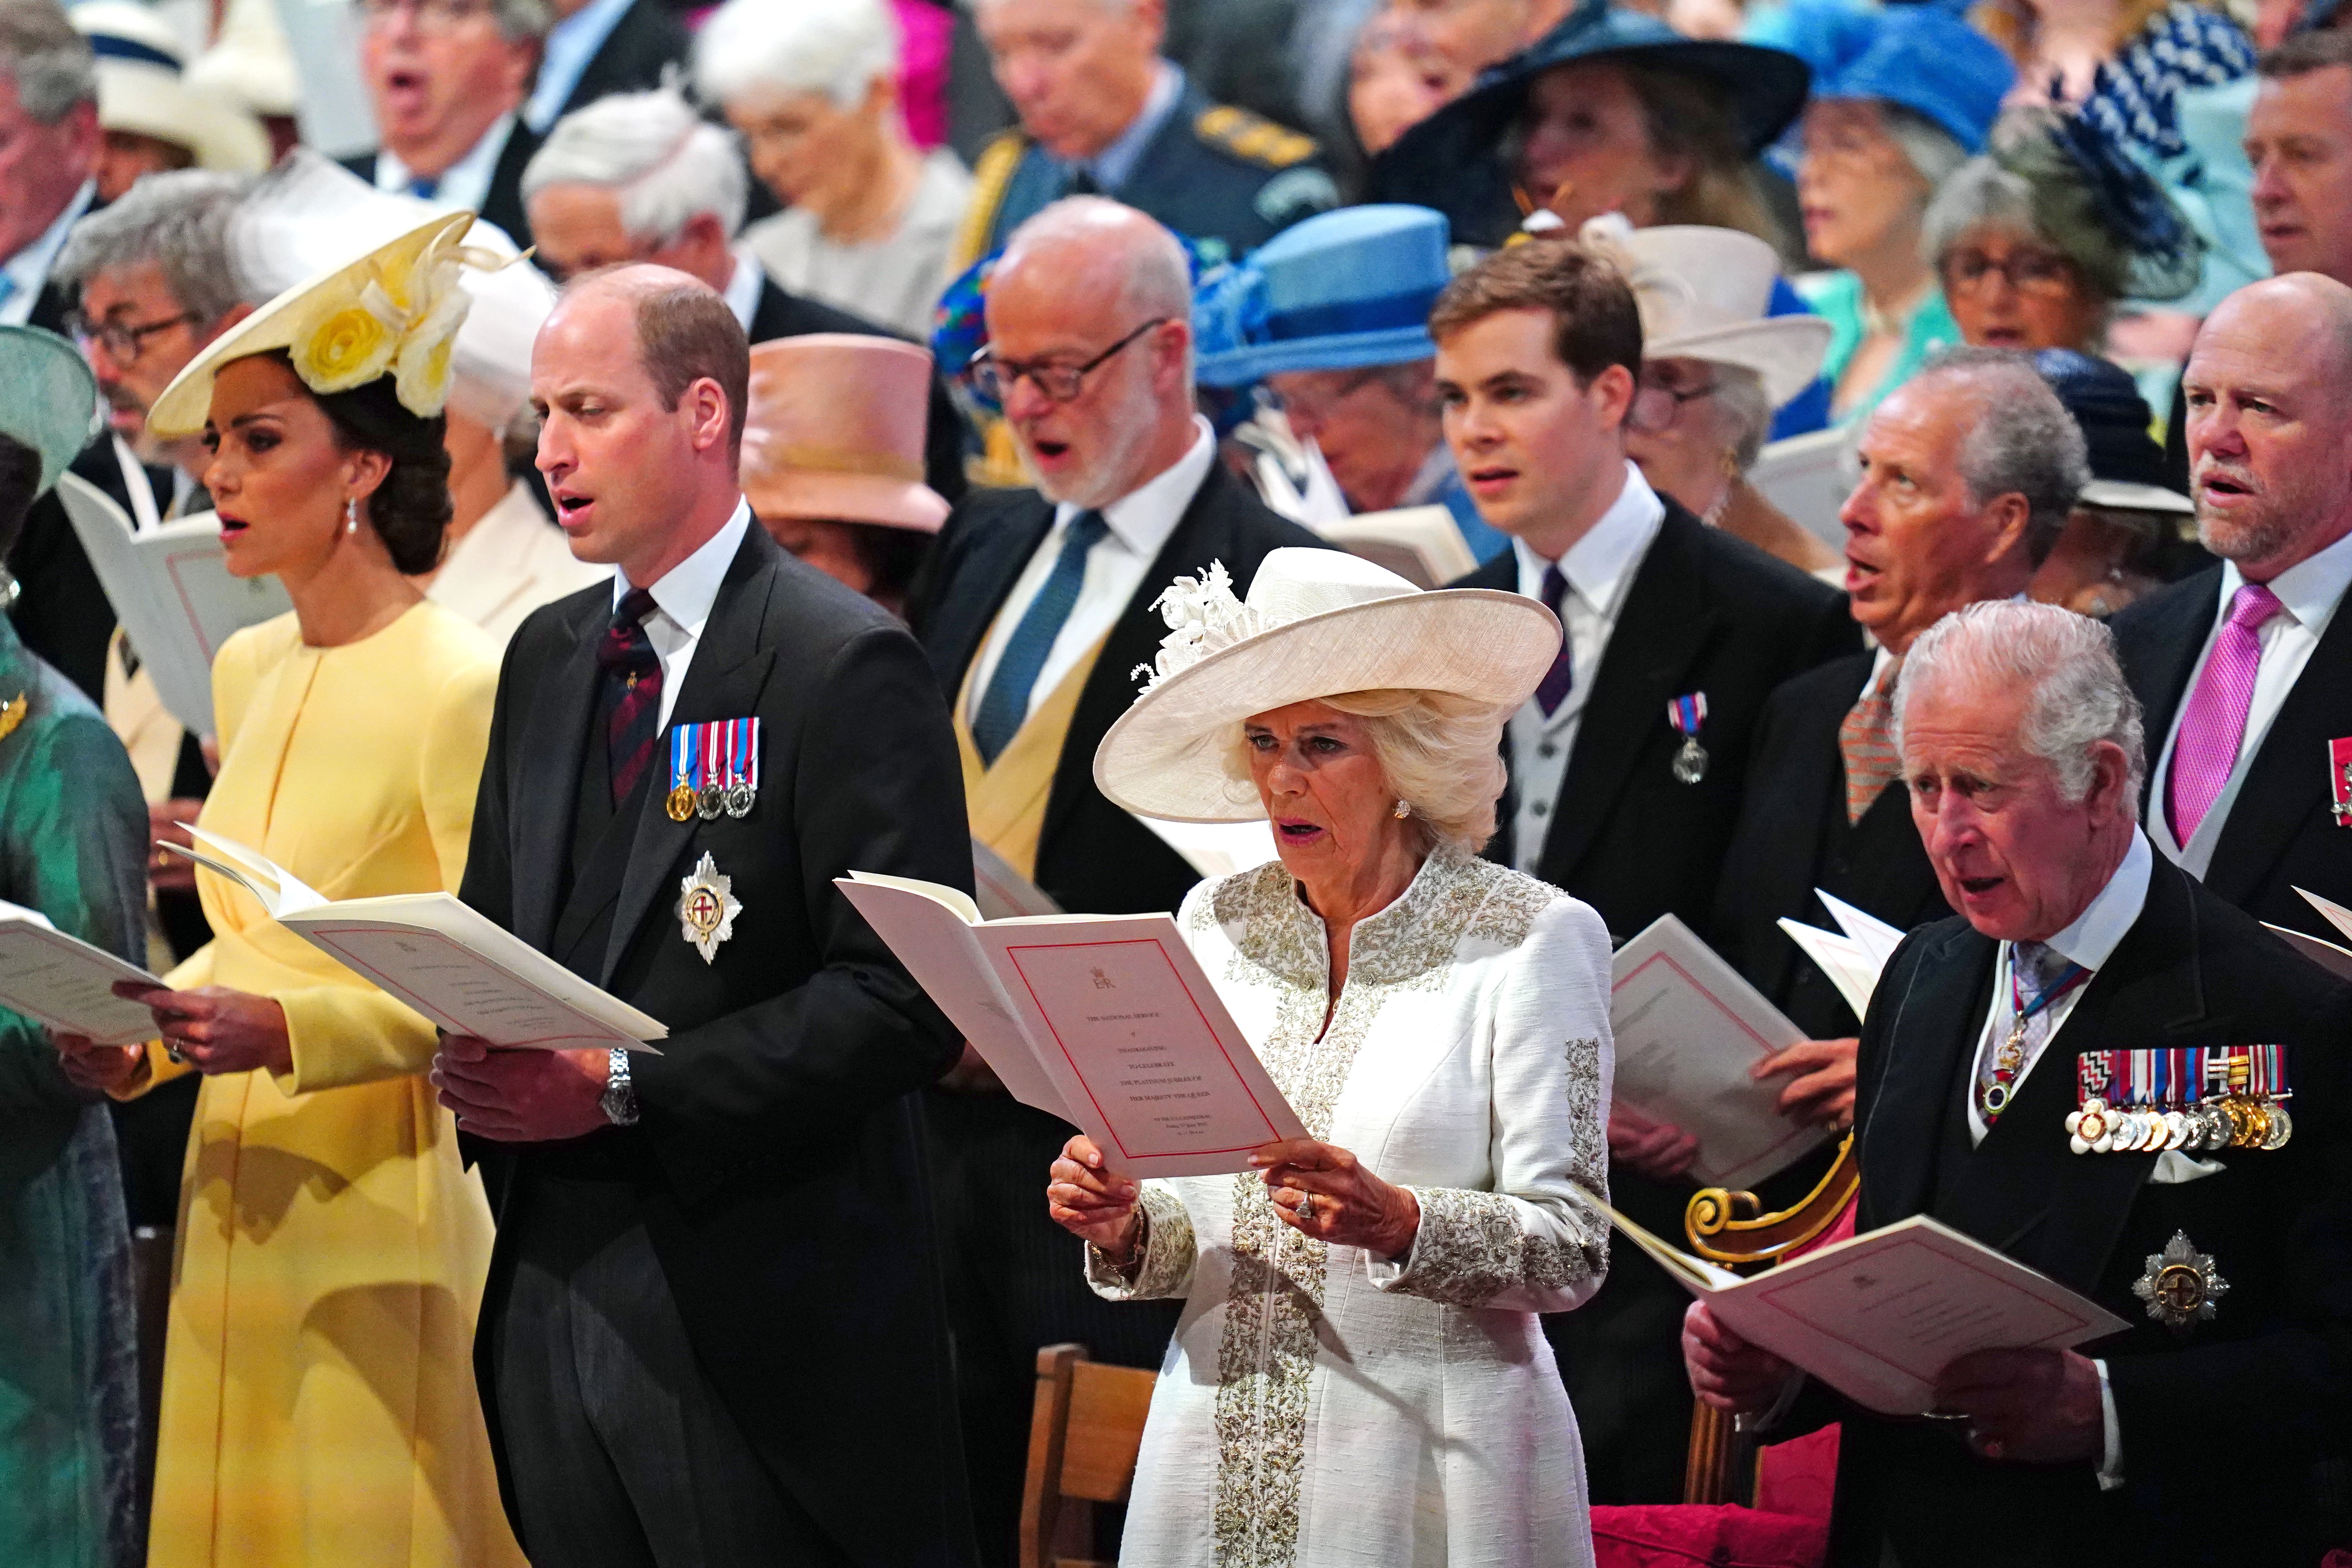 Duchess Kate, Prince William, Duchess Camilla and Prince Charles at the National Service of Thanksgiving to celebrate the Queen's Platinum Jubilee at St Paul's Cathedral on June 3, 2022 in London, England.  |  Source: Getty Images